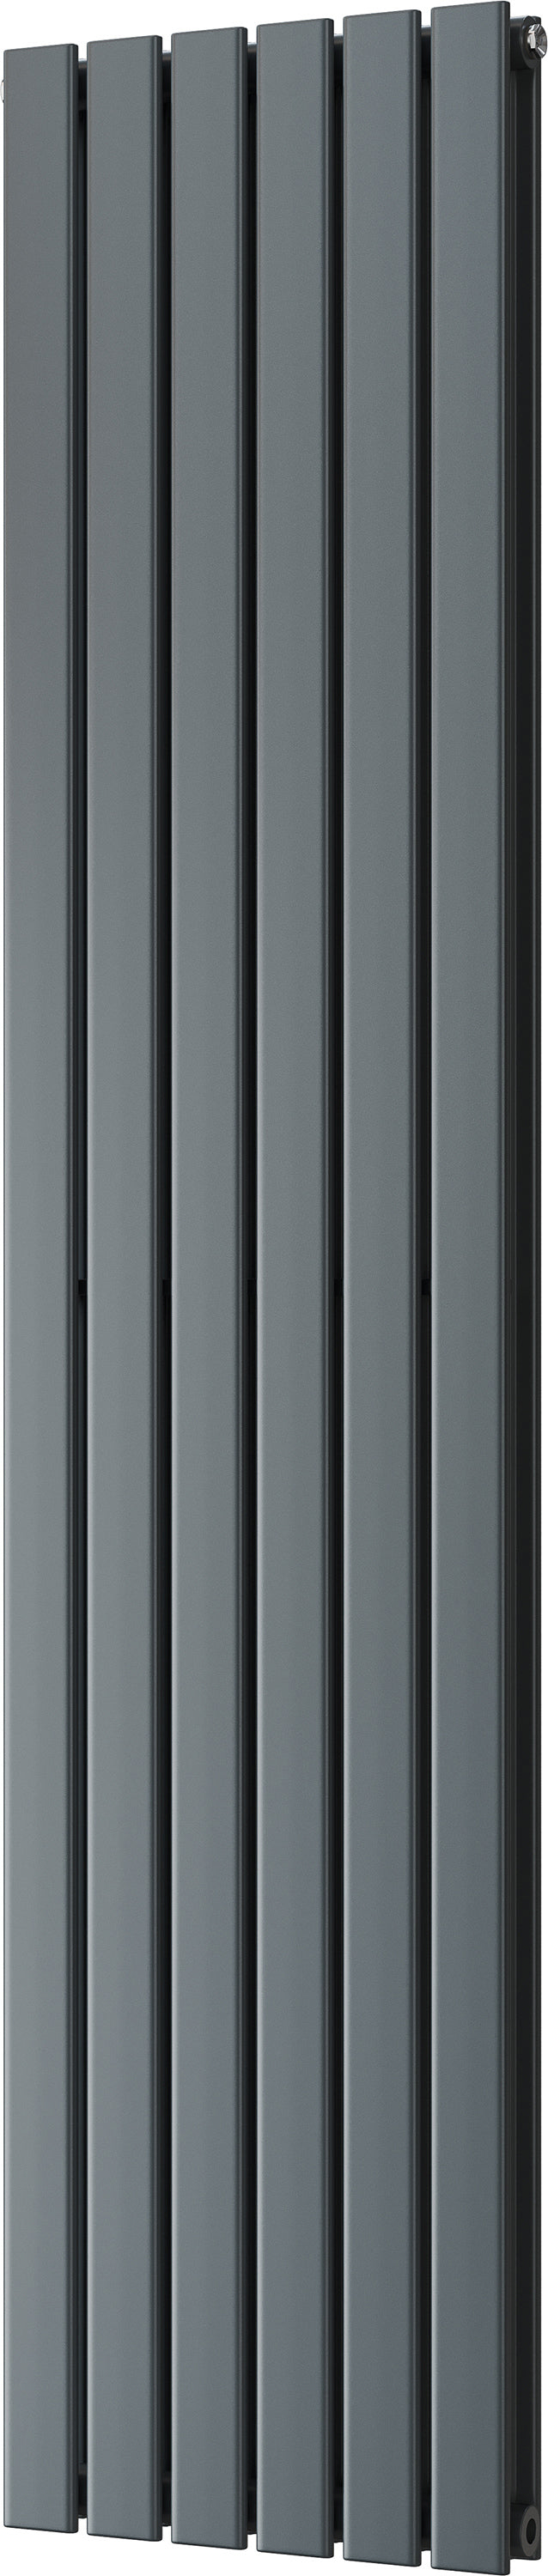 Typhoon - Anthracite Vertical Radiator H1800mm x W408mm Double Panel